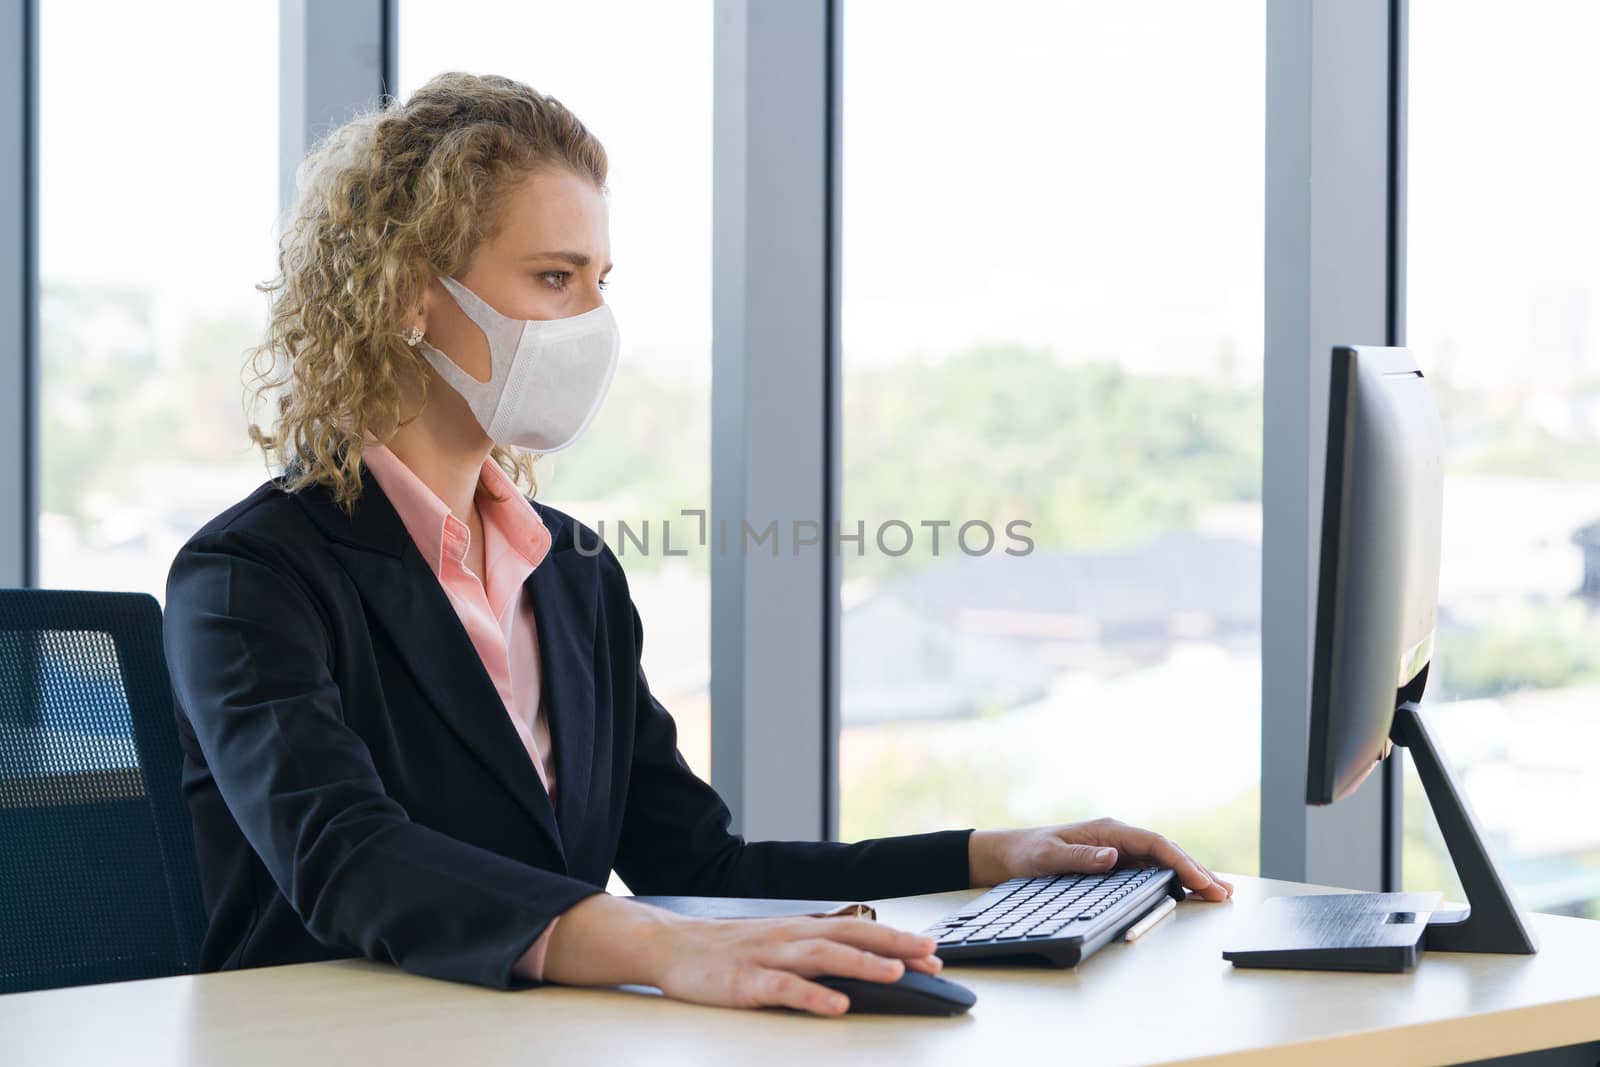 Reduce the spread of Coronavirus disease 2019 (COVID-19) in the office. 
Ways to prevent the transmission of disease can be done by wearing a surgical mask.